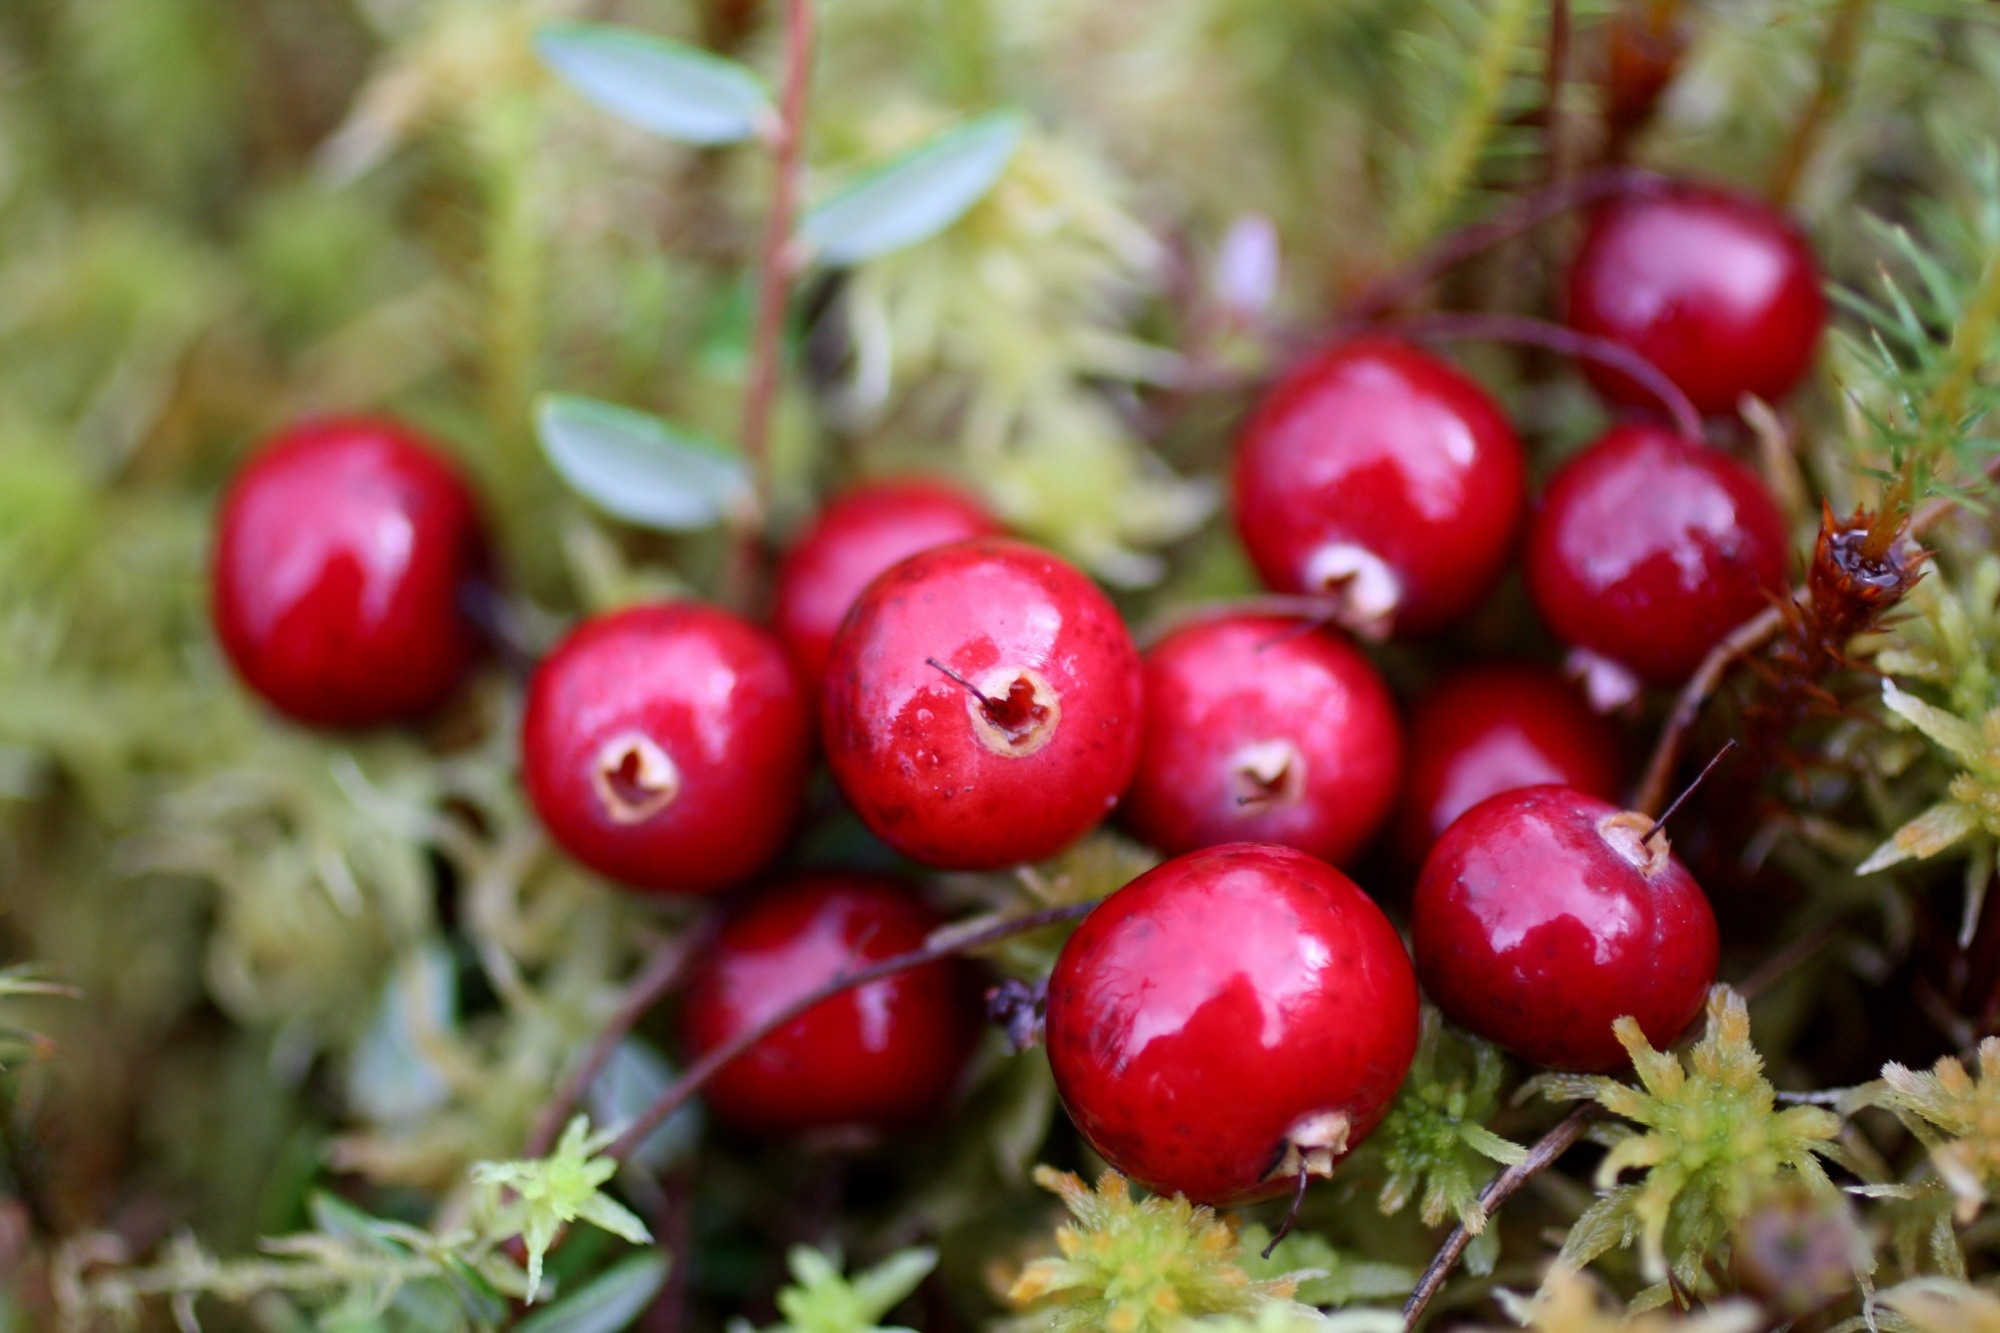 Review: Cranberries for preventing urinary tract infections. Image Credit: Irina Green 27 / Shutterstock